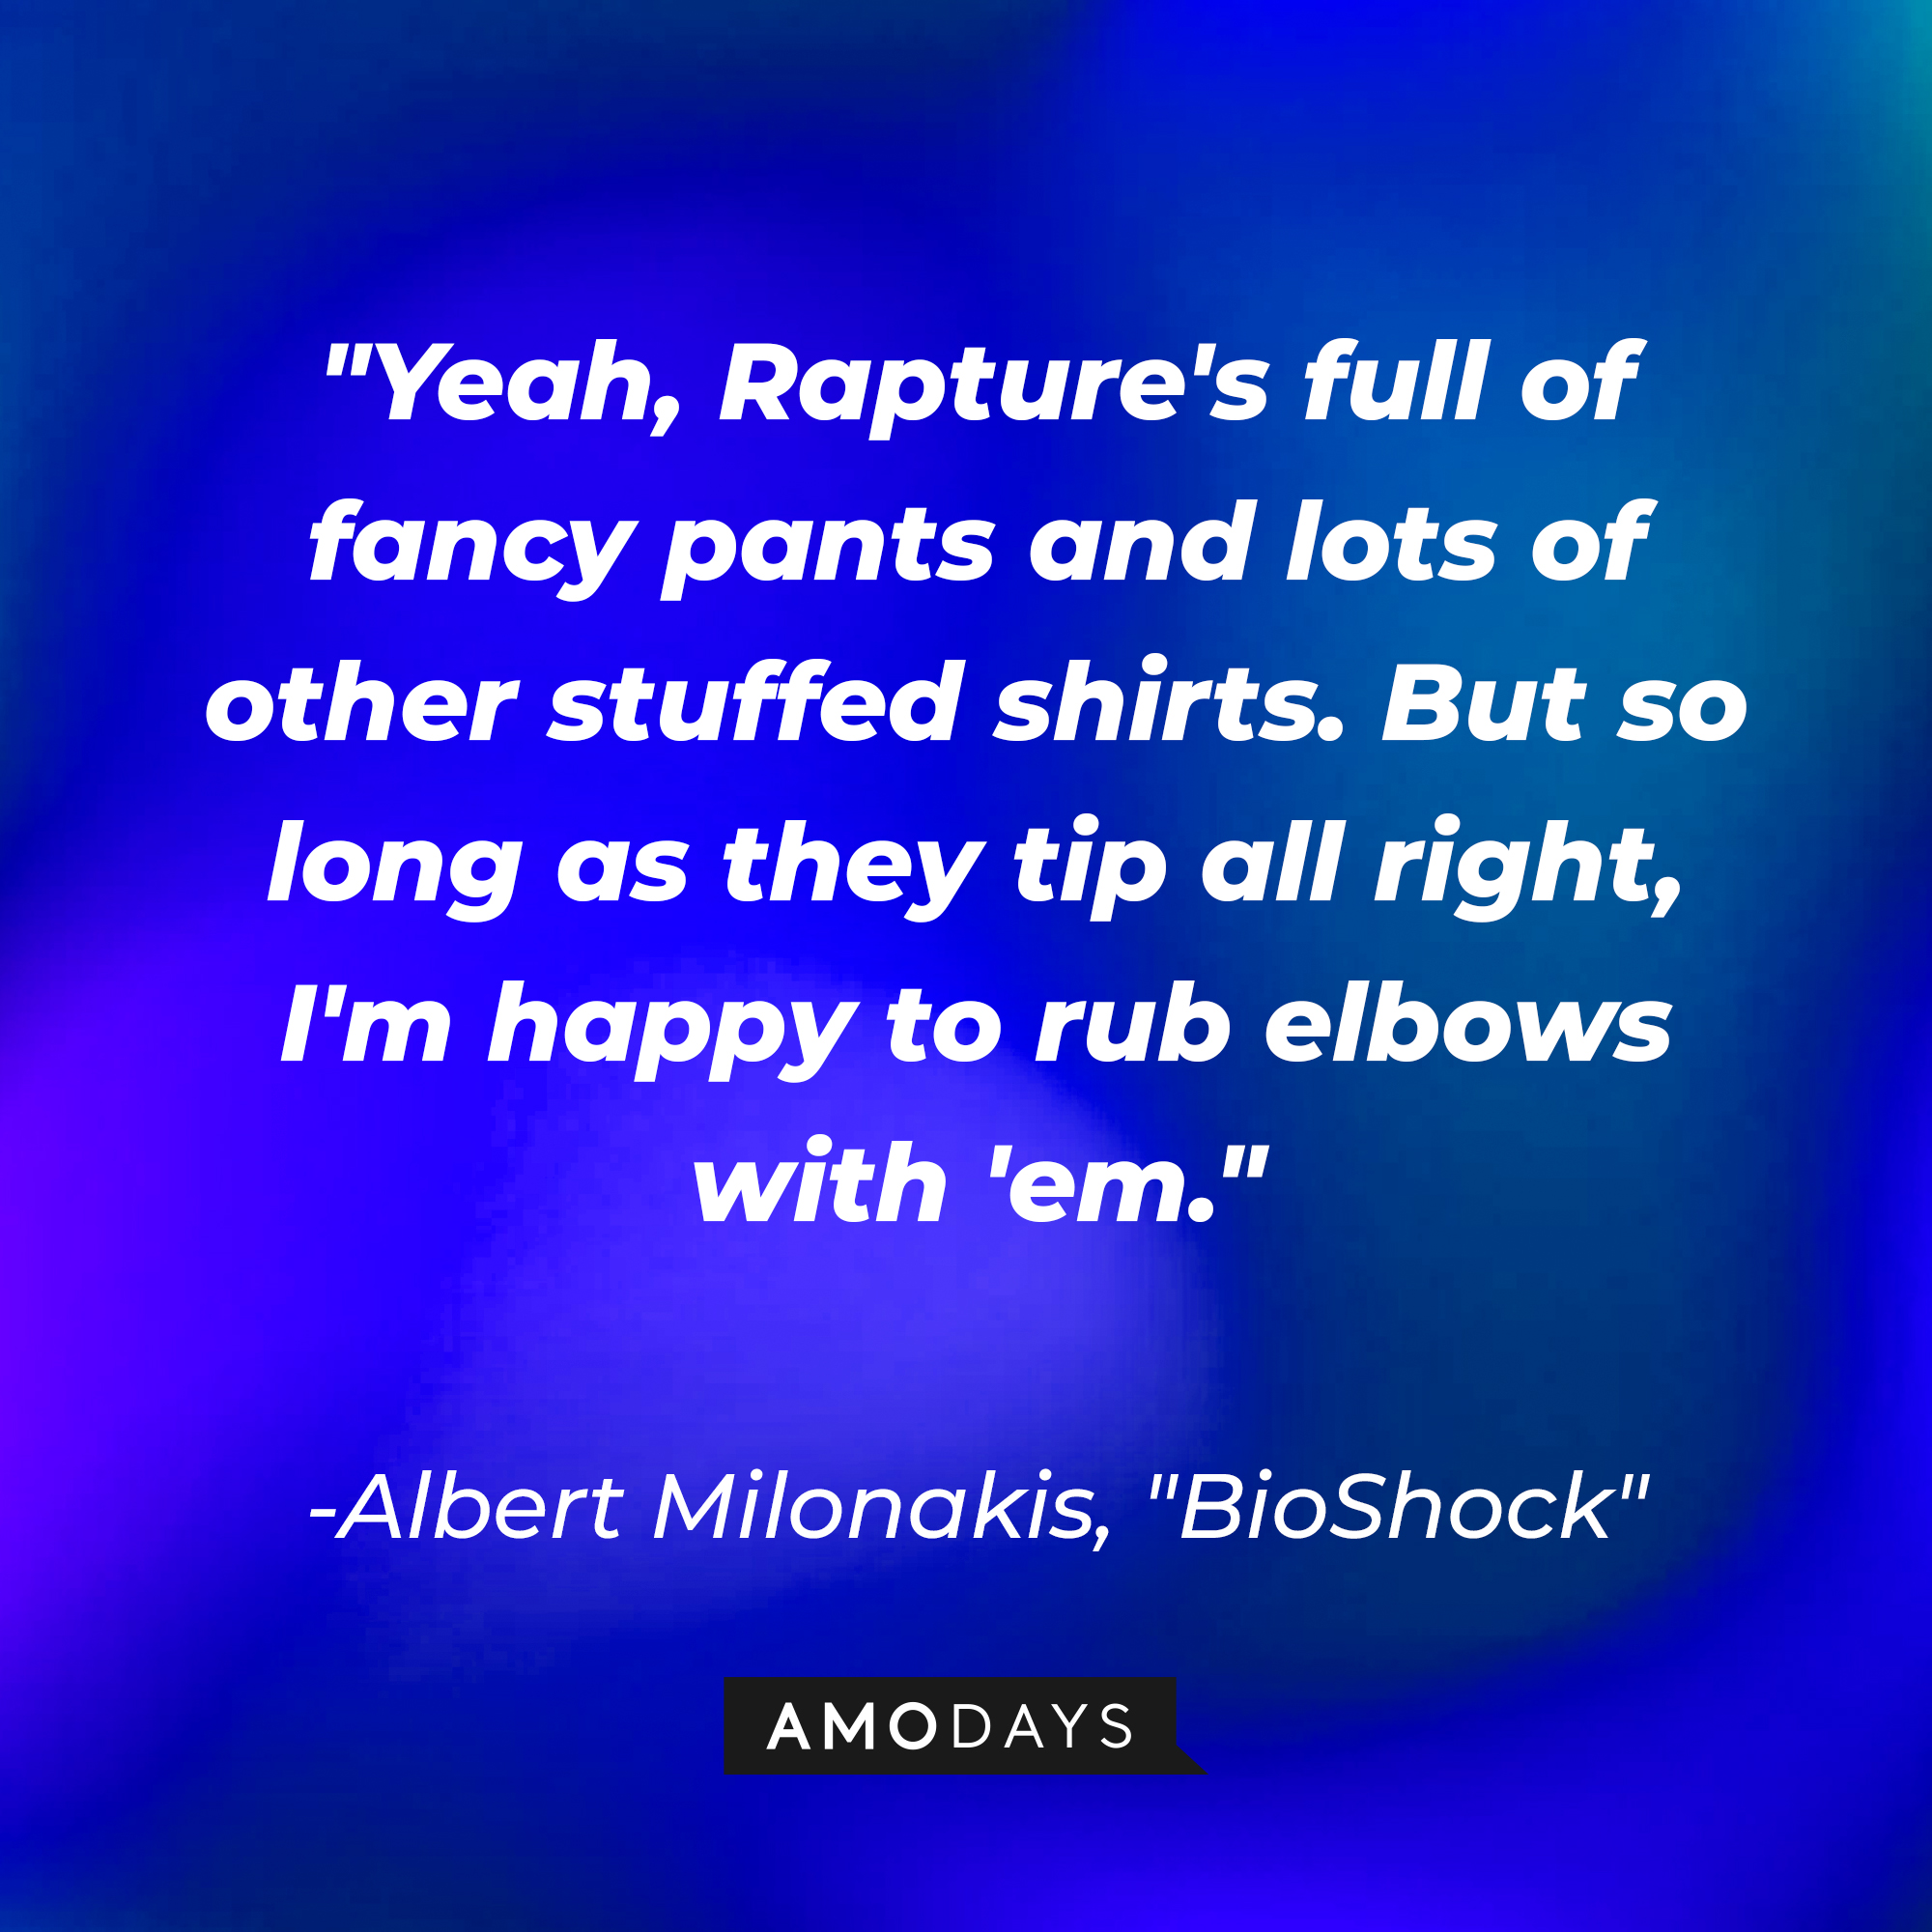 Albert Milonakis' quote from "BioShock:" "Yeah, Rapture's full of fancy pants and lots of other stuffed shirts. But so long as they tip all right, I'm happy to rub elbows with 'em." | Source: AmoDays